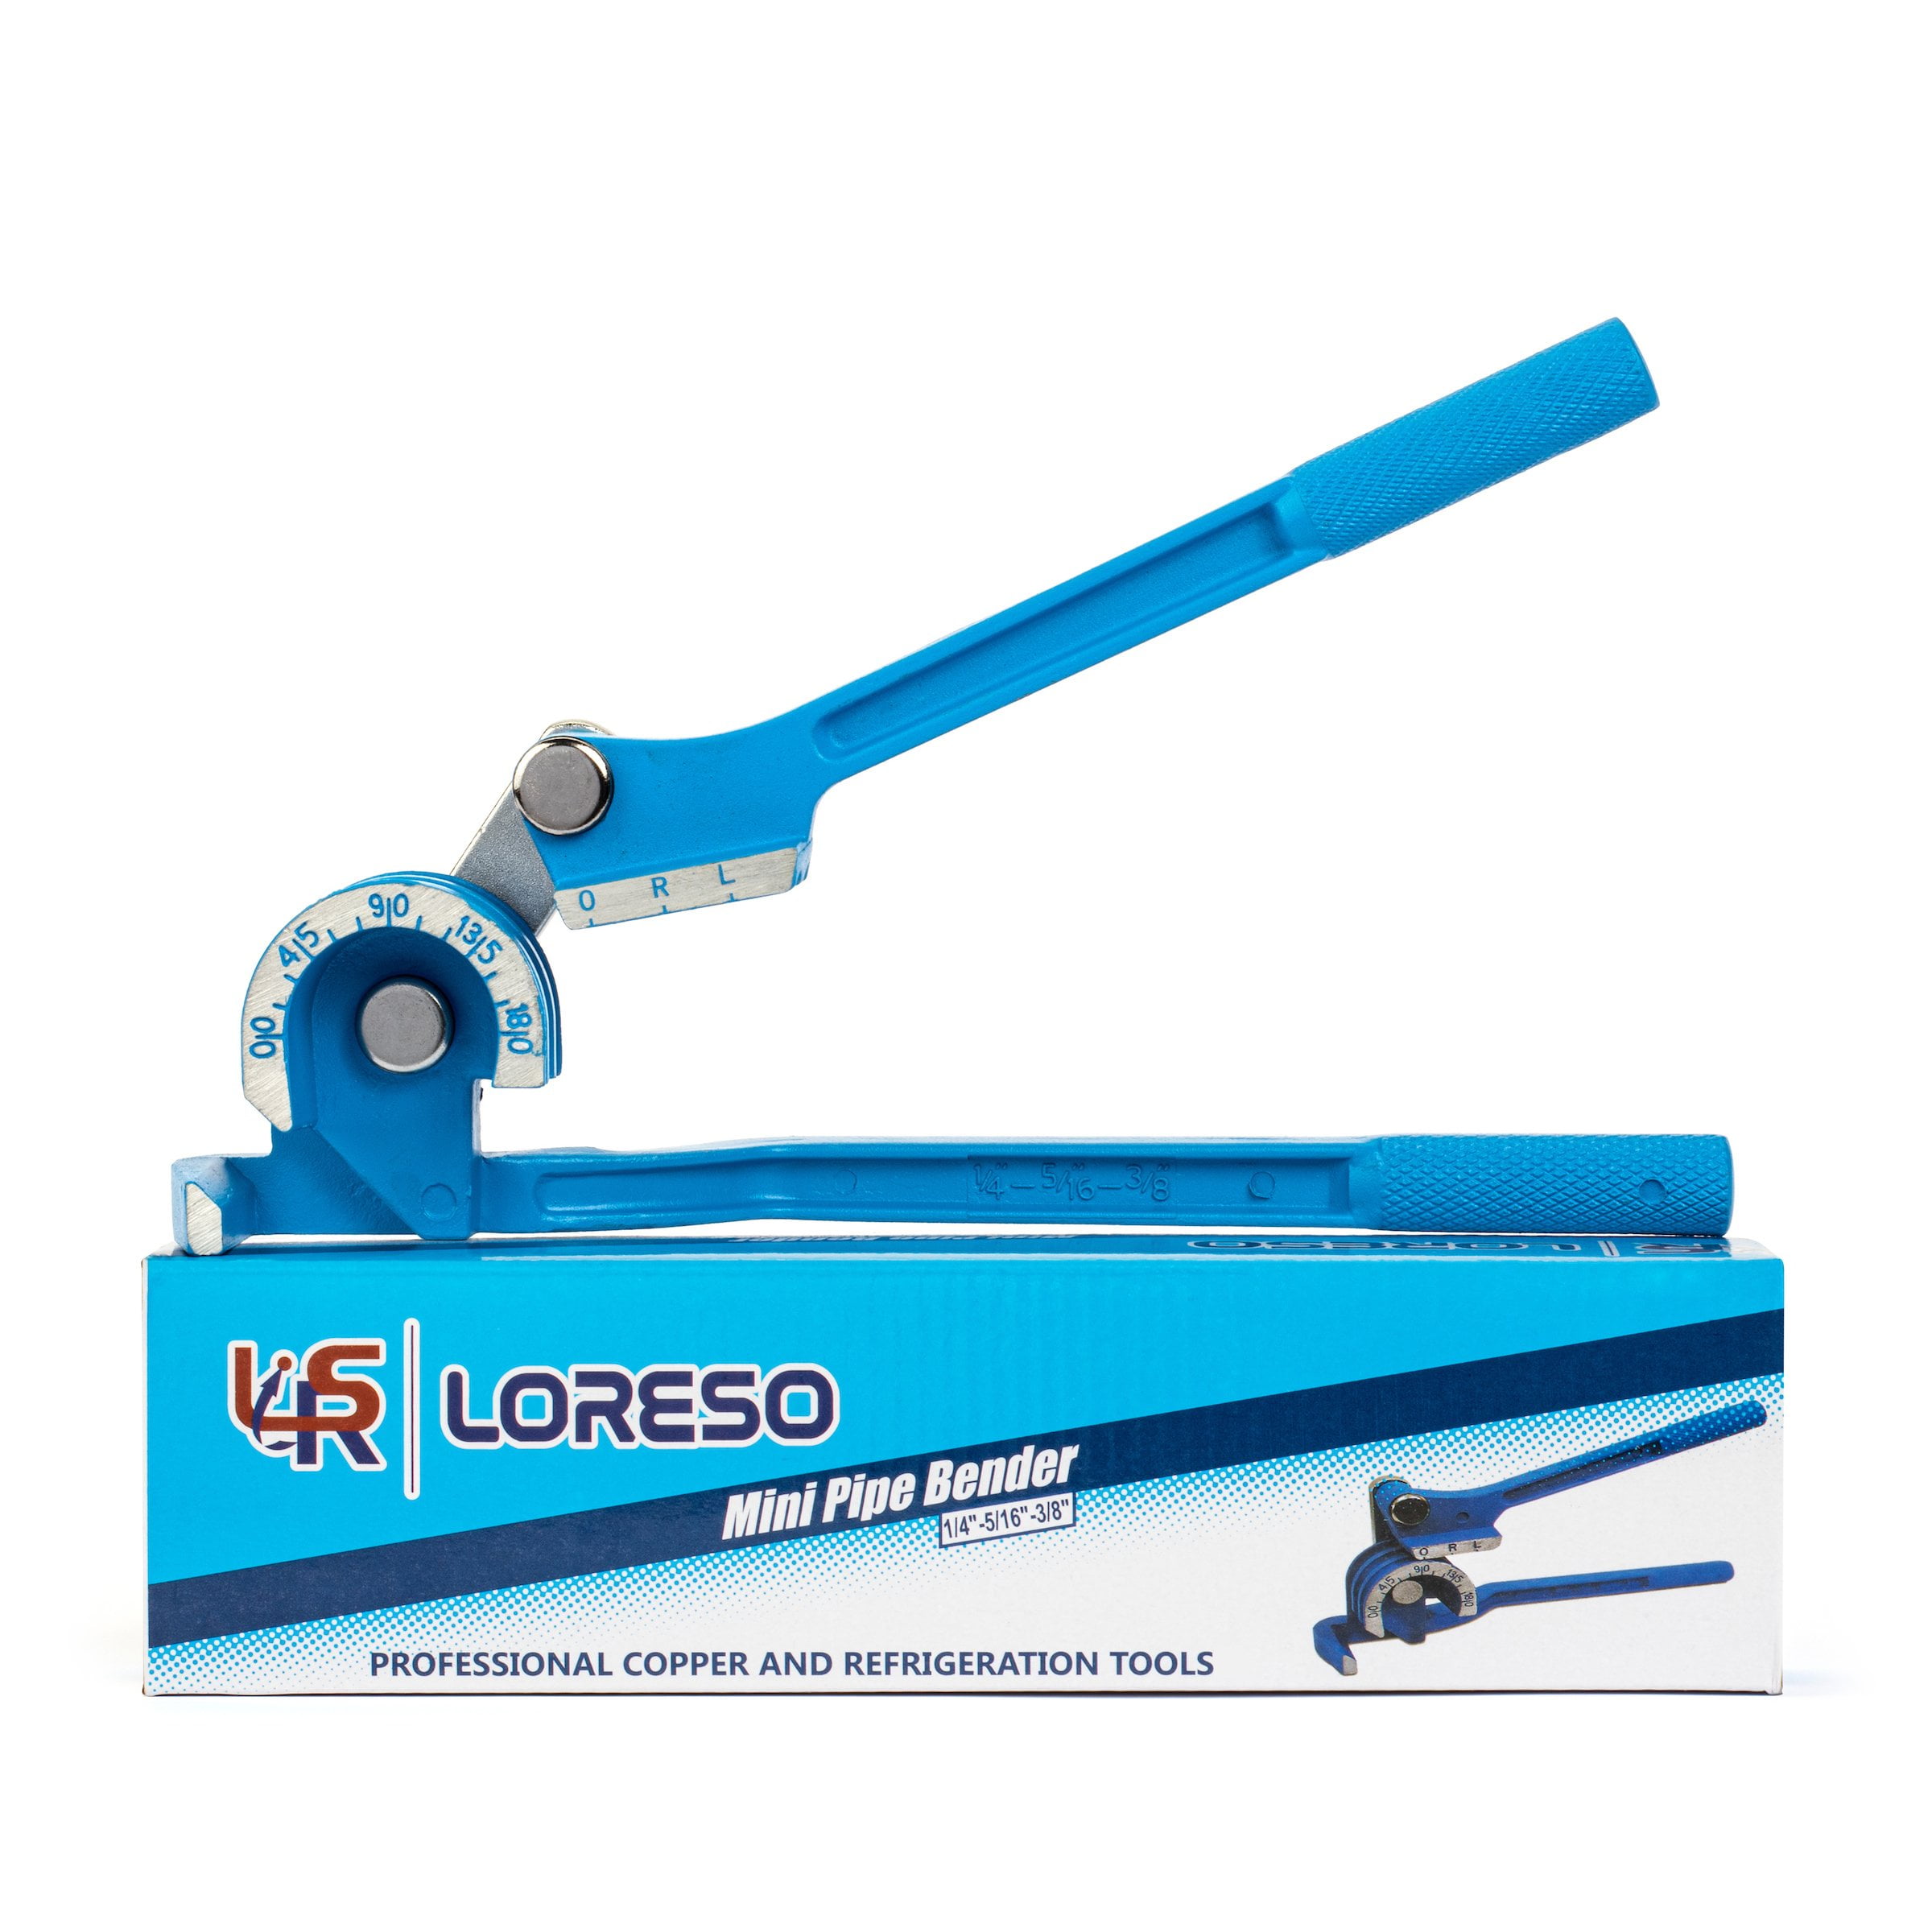 Pipe Bender Tube Bender Stable Aluminum Alloy Manual Pipe Bender 3/8 1/2 5/8 3/4 7/8 Inch for Refrigeration Air Conditioning 